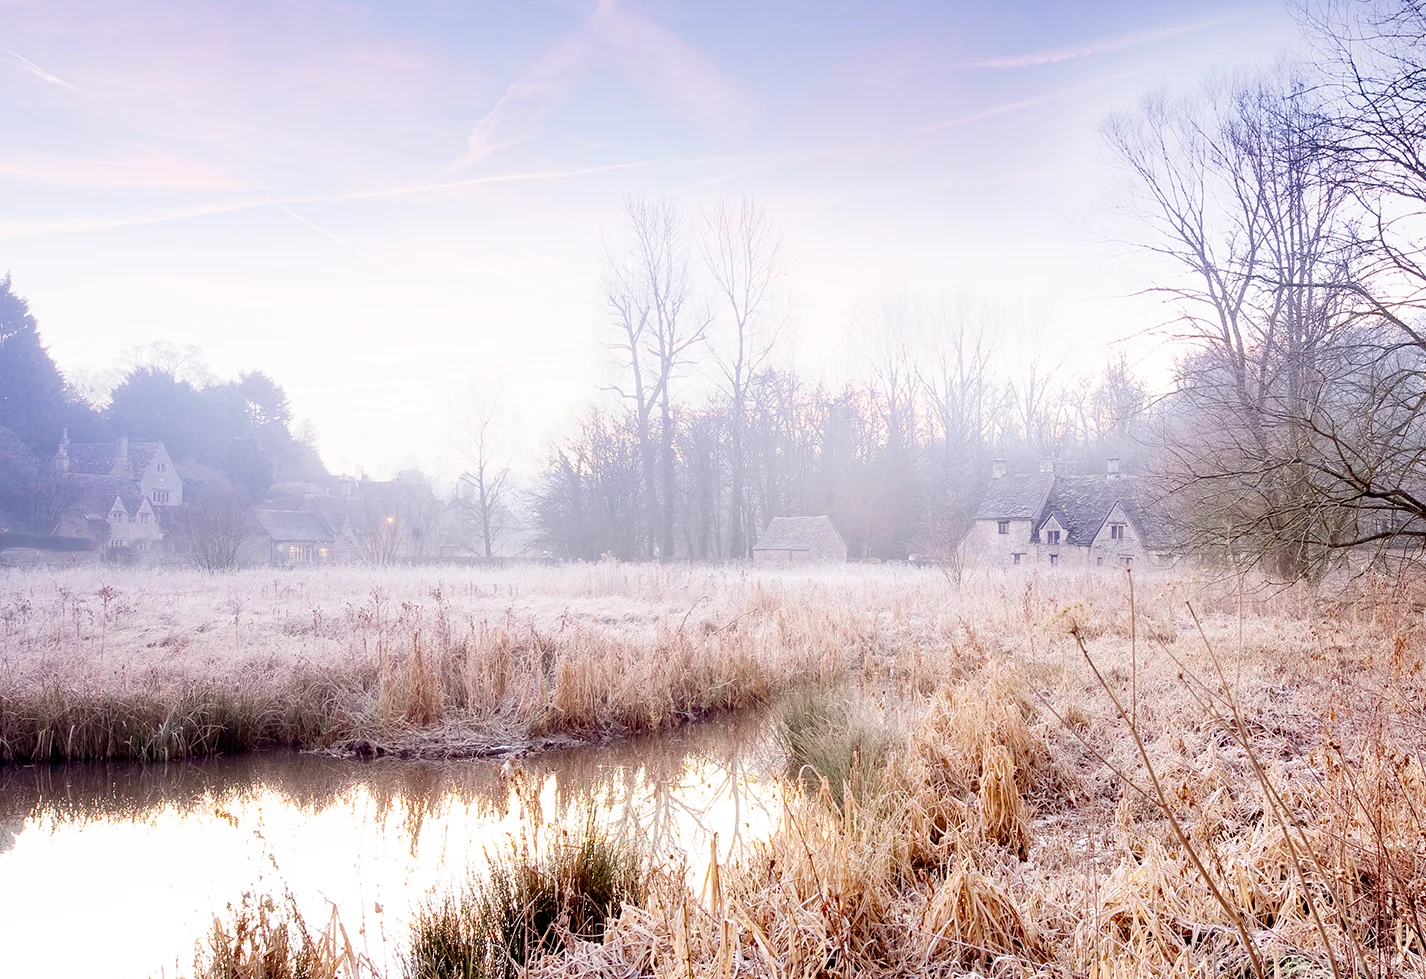 Frosty bracken surrounding a pond, with a few traditional cottages set in the woods in the background.